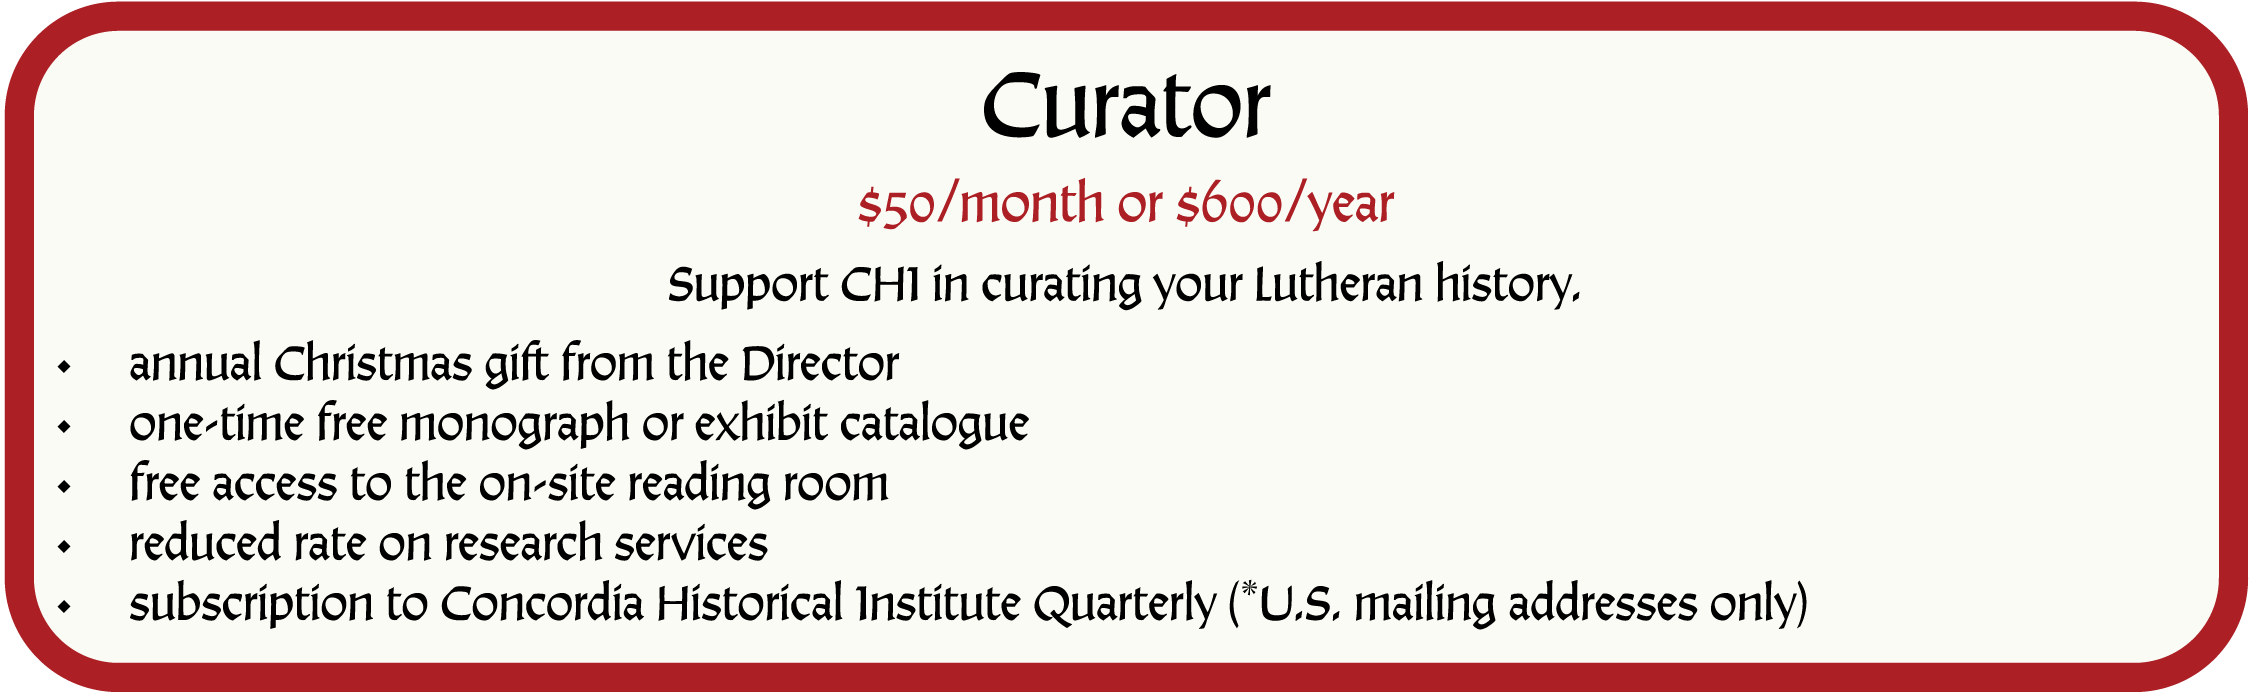 Curator. $50/month or $600/year. Support CHI in curating your Lutheran history. Membership as a Curator includes the following benefits: annual Christmas gift from the Director; one-time free monograph or exhibit catalogue; free access to the on-site reading room; reduced rate on research services; subscription to Concordia Historical Institute Quarterly (*U.S. mailing addresses only)